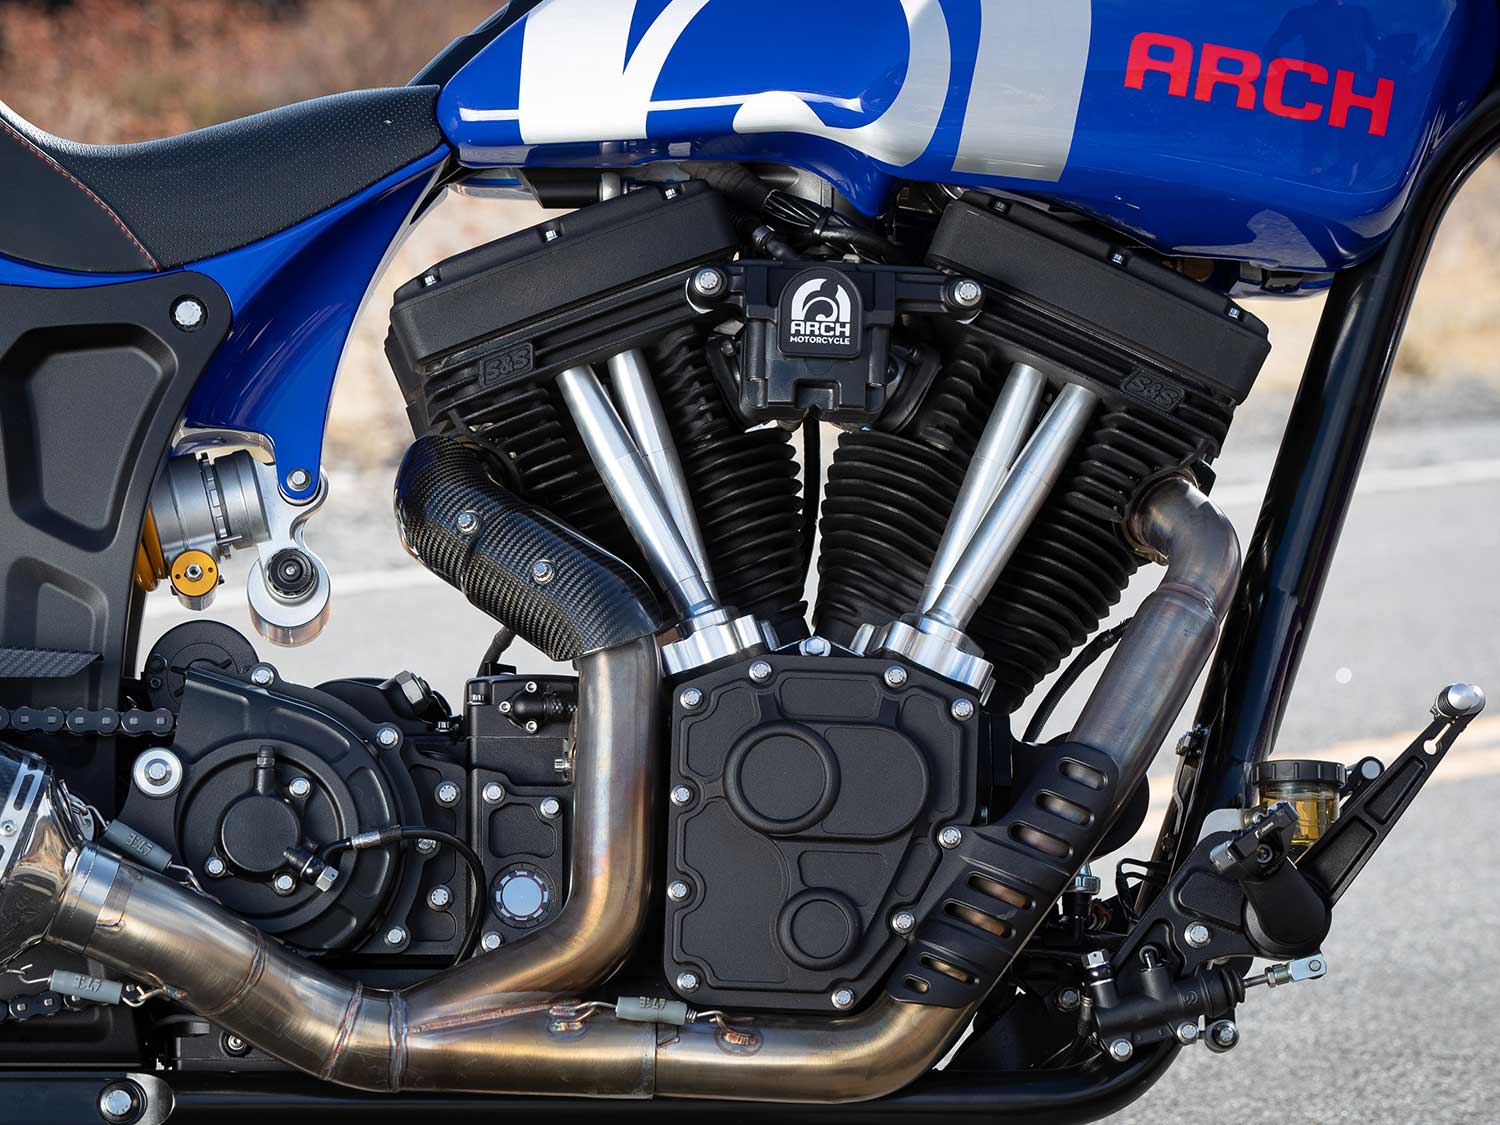 The Arch/S&S 124ci V-twin engine employs a unique Arch downdraft breathing system hidden between the billet aluminum tank halves out of the way of the rider’s legs.